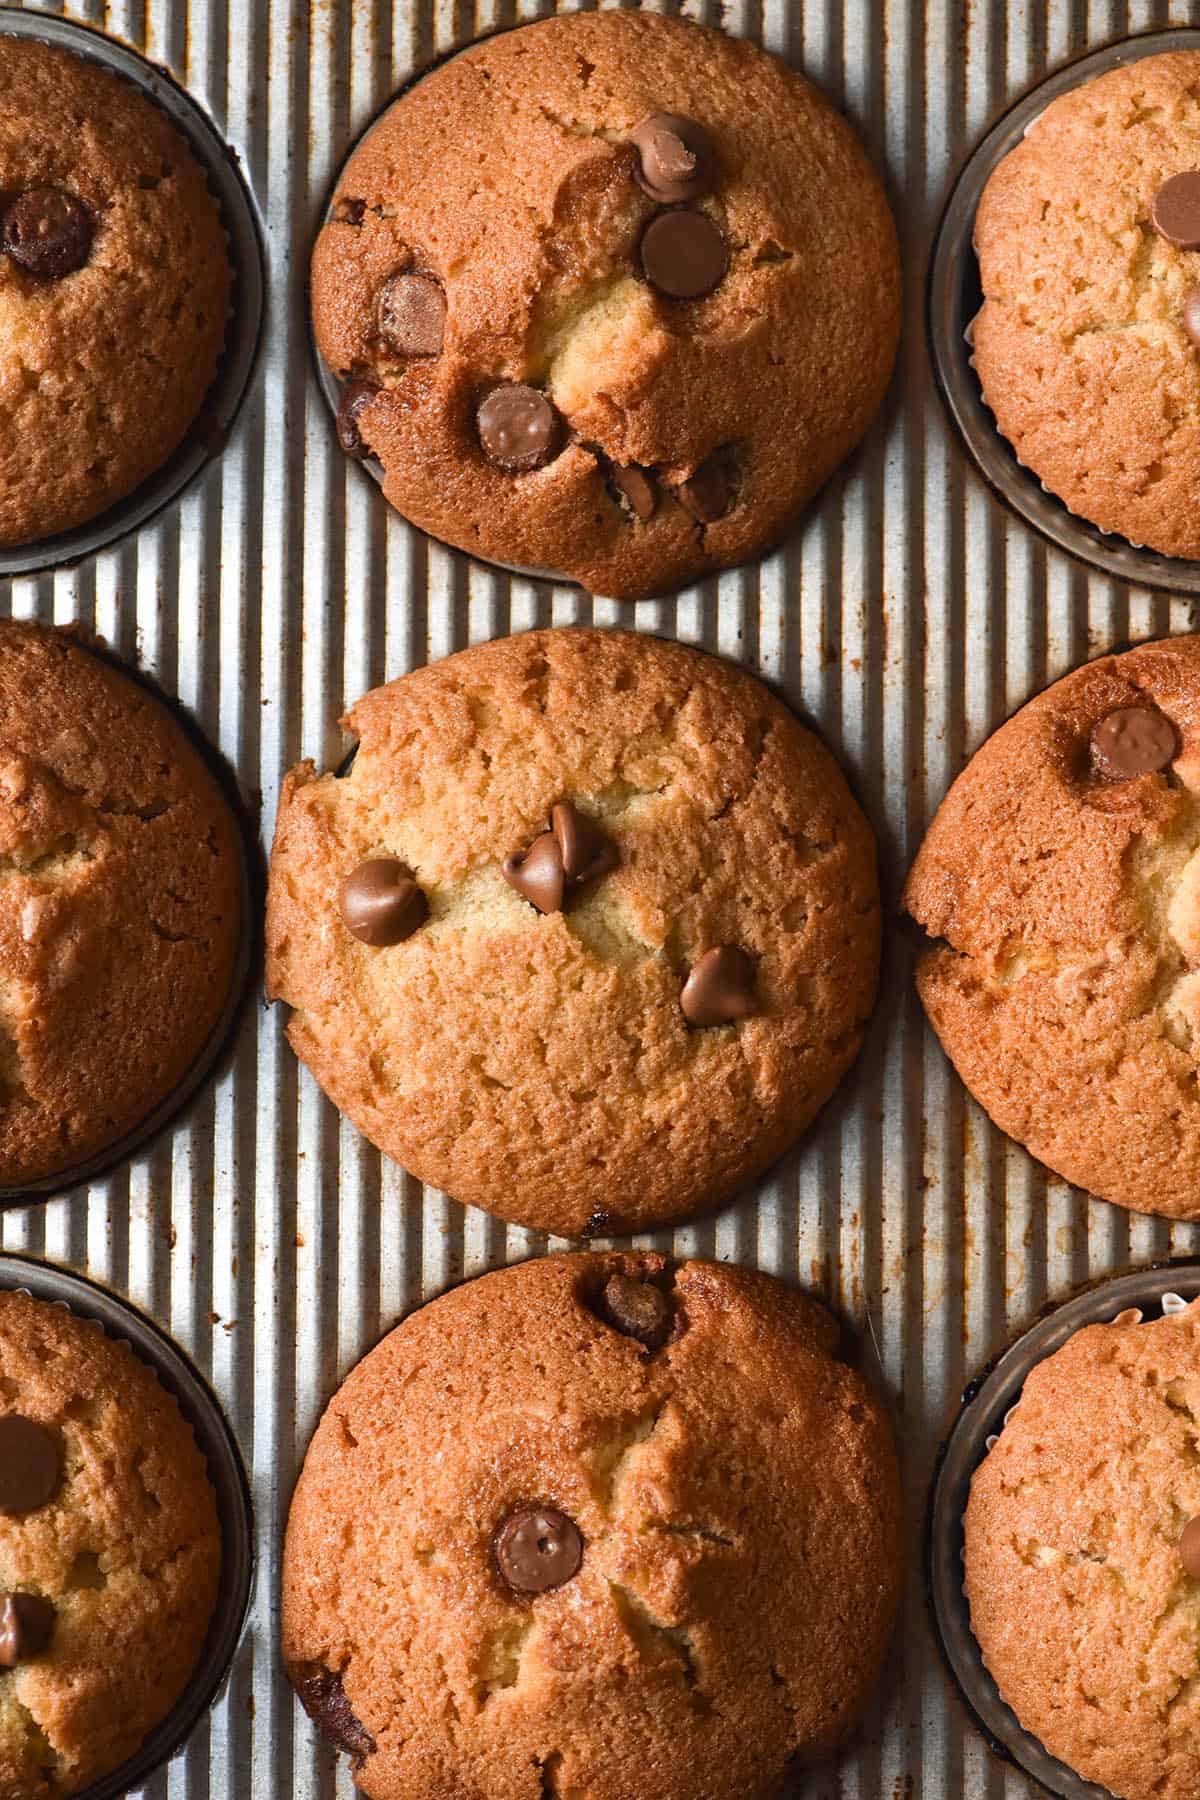 An aerial image of gluten free chocolate chip muffins in a silver textured muffin tray. The muffins are topped with chocolate chips and have a golden brown crumb. 